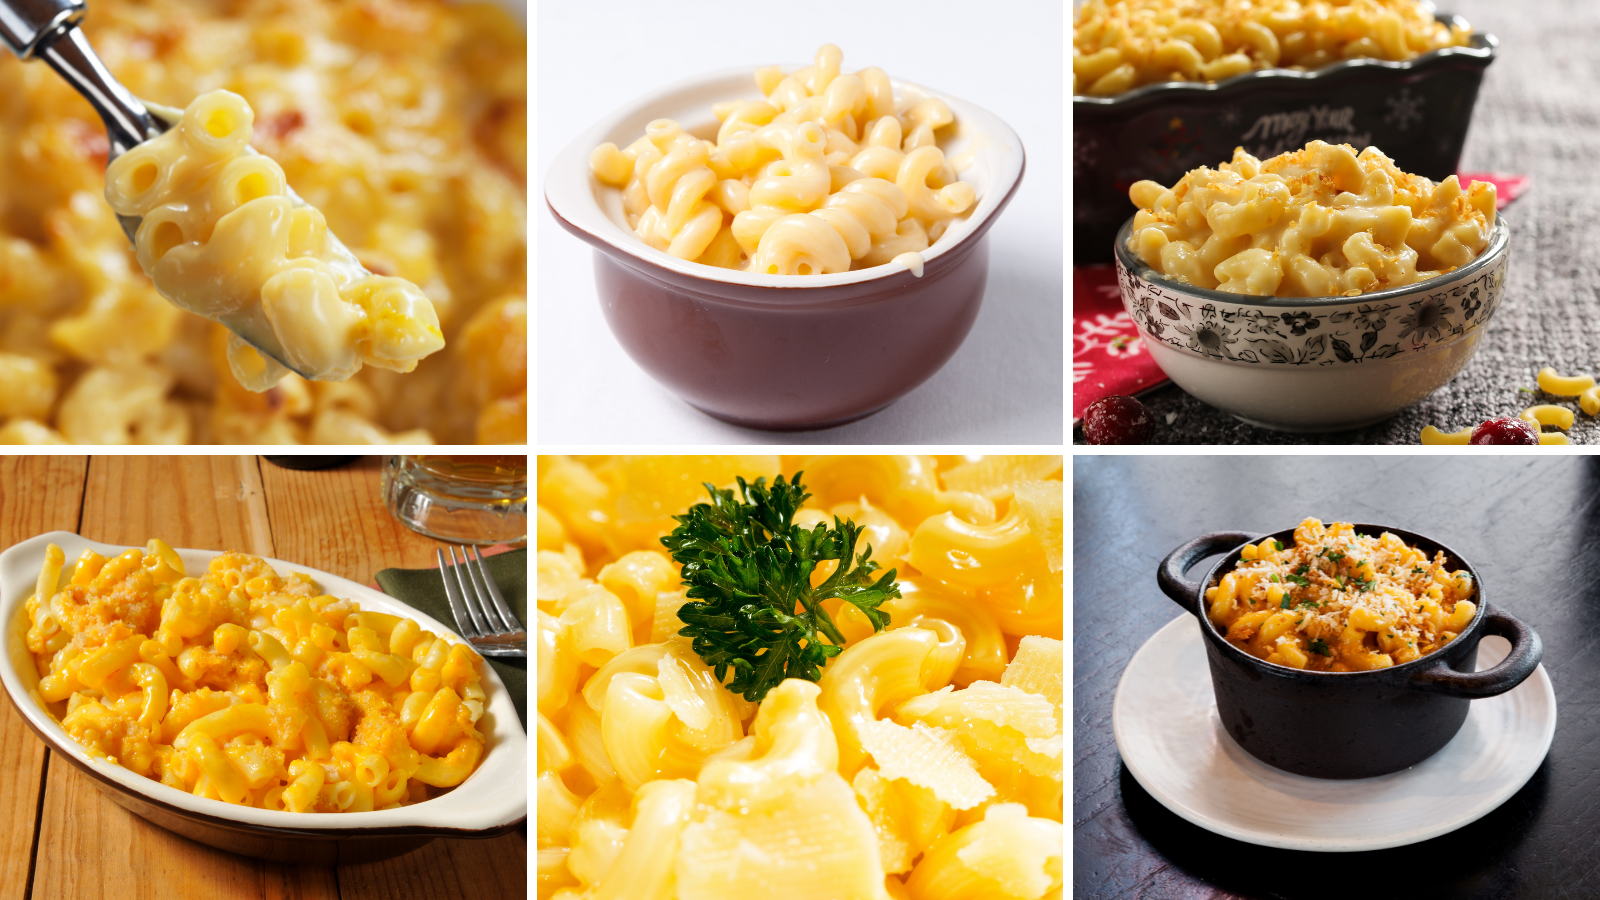 7 Delicious Vegan Mac And Cheese Recipes For Your Kids